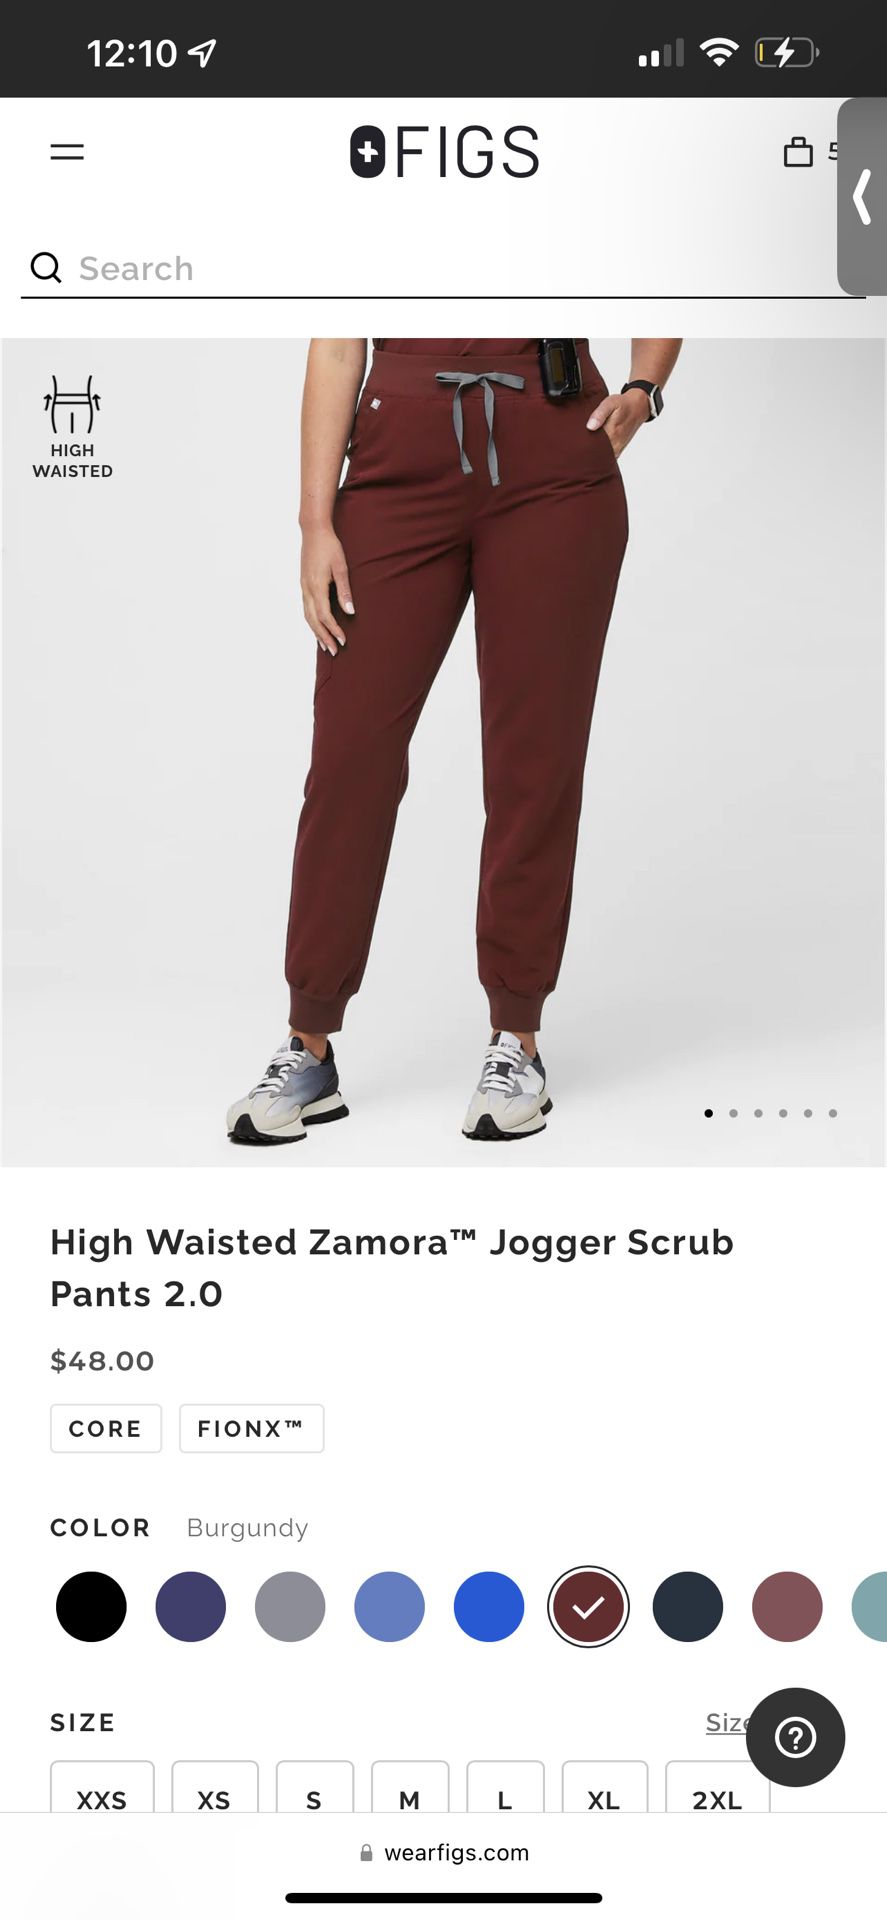 Top and joggers Figs scrubs